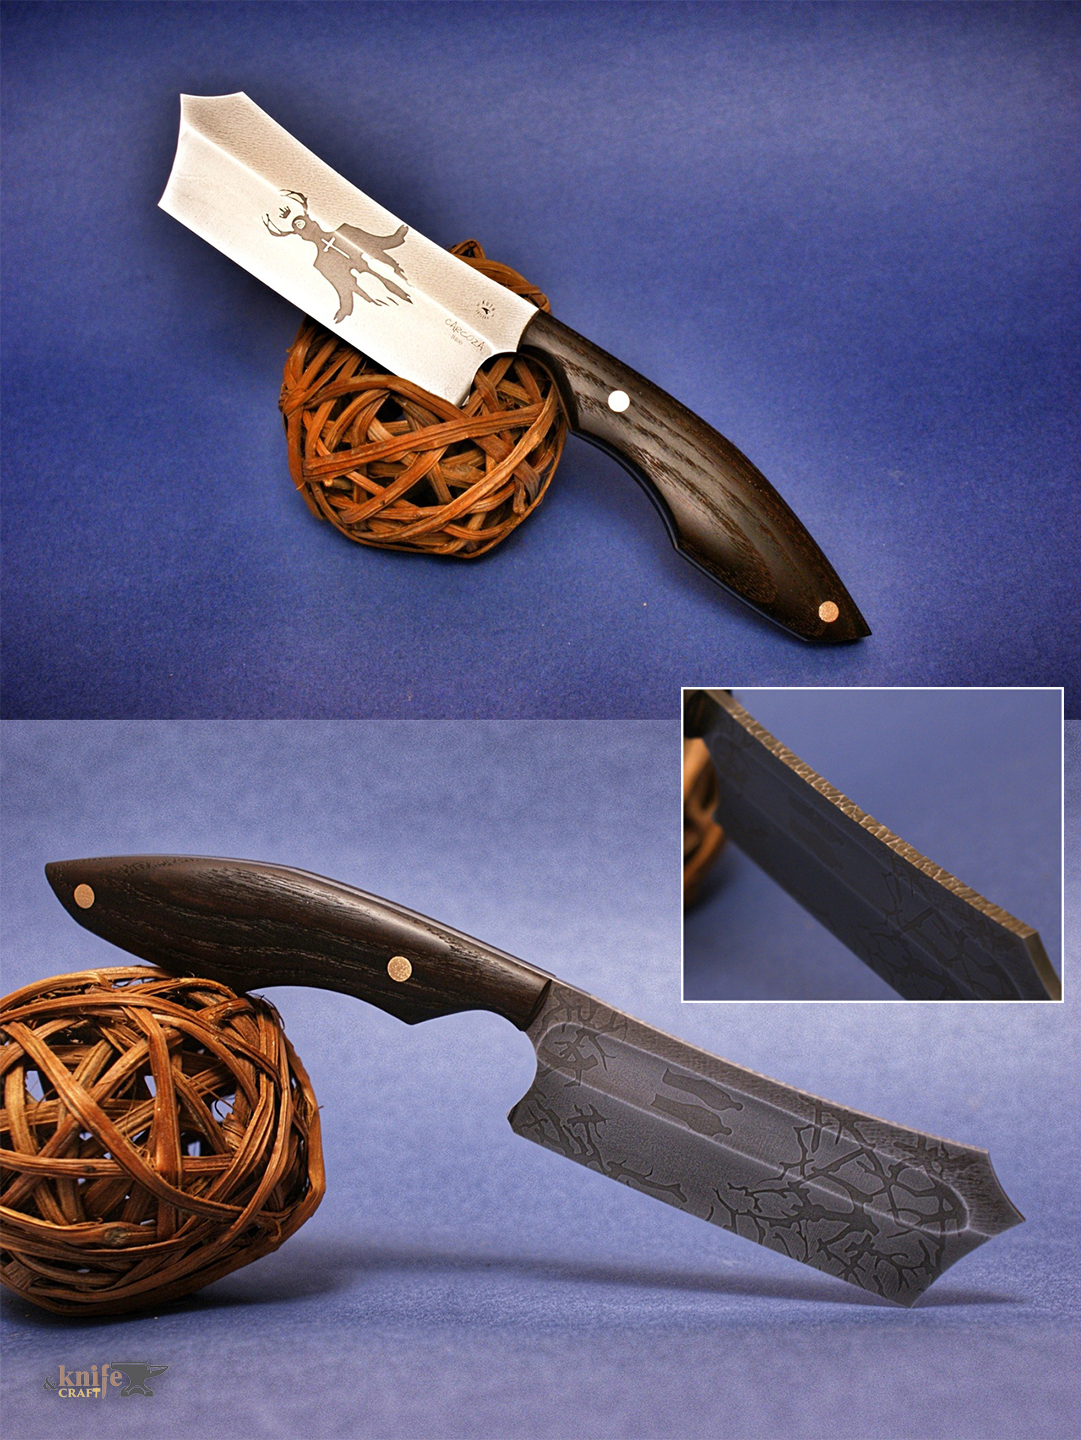 russian handemade fulltang knife with B400 and image of a knight on the blade